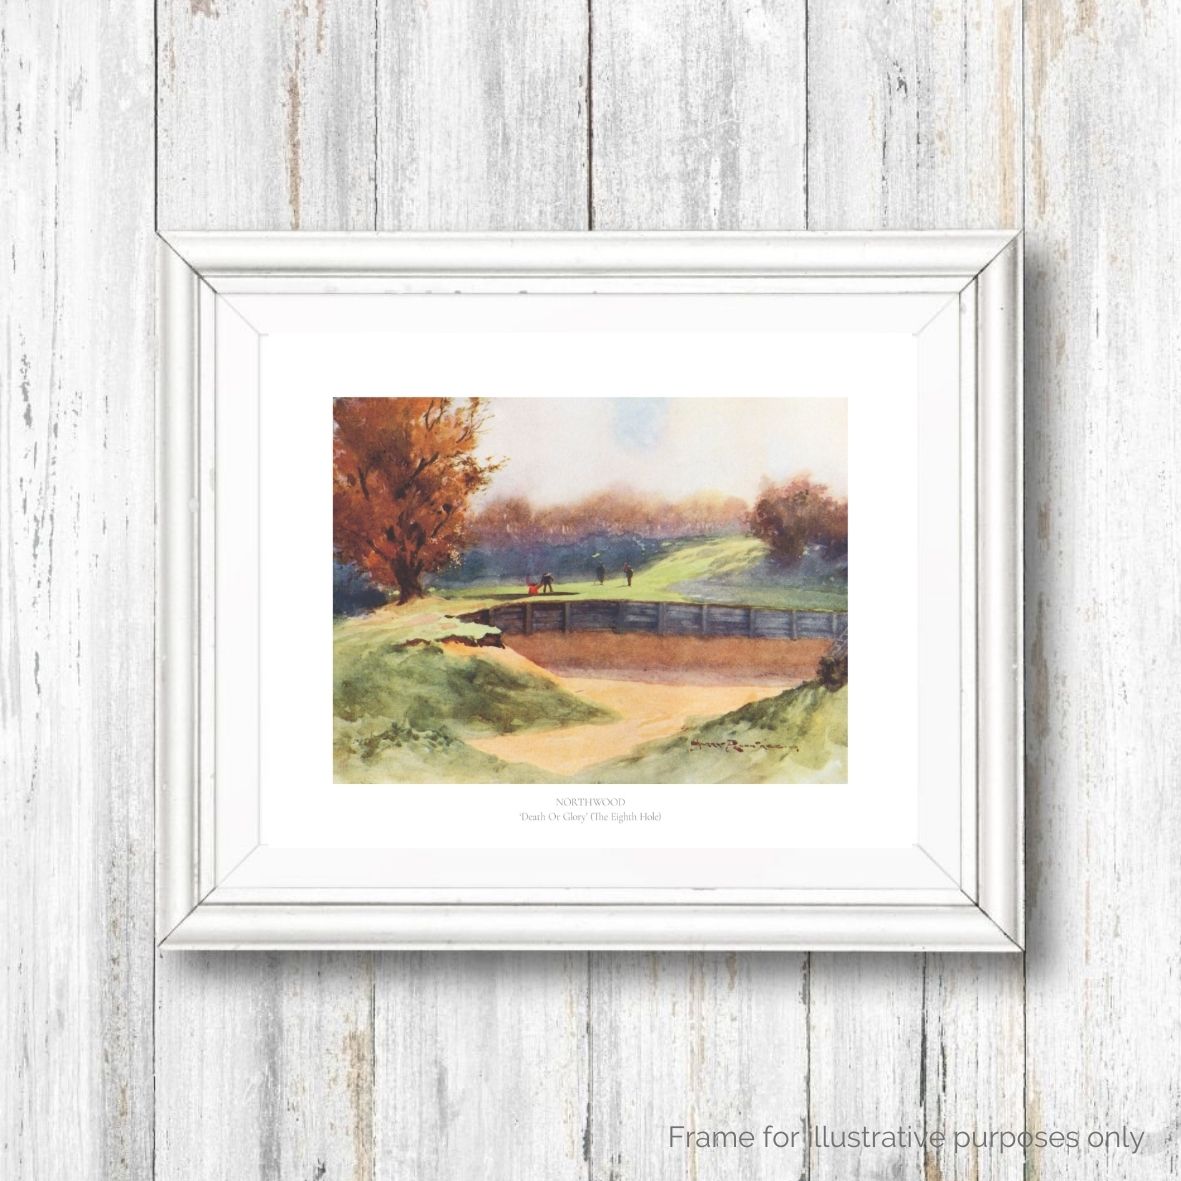 Northwood Golf Club framed print with text by Rountree